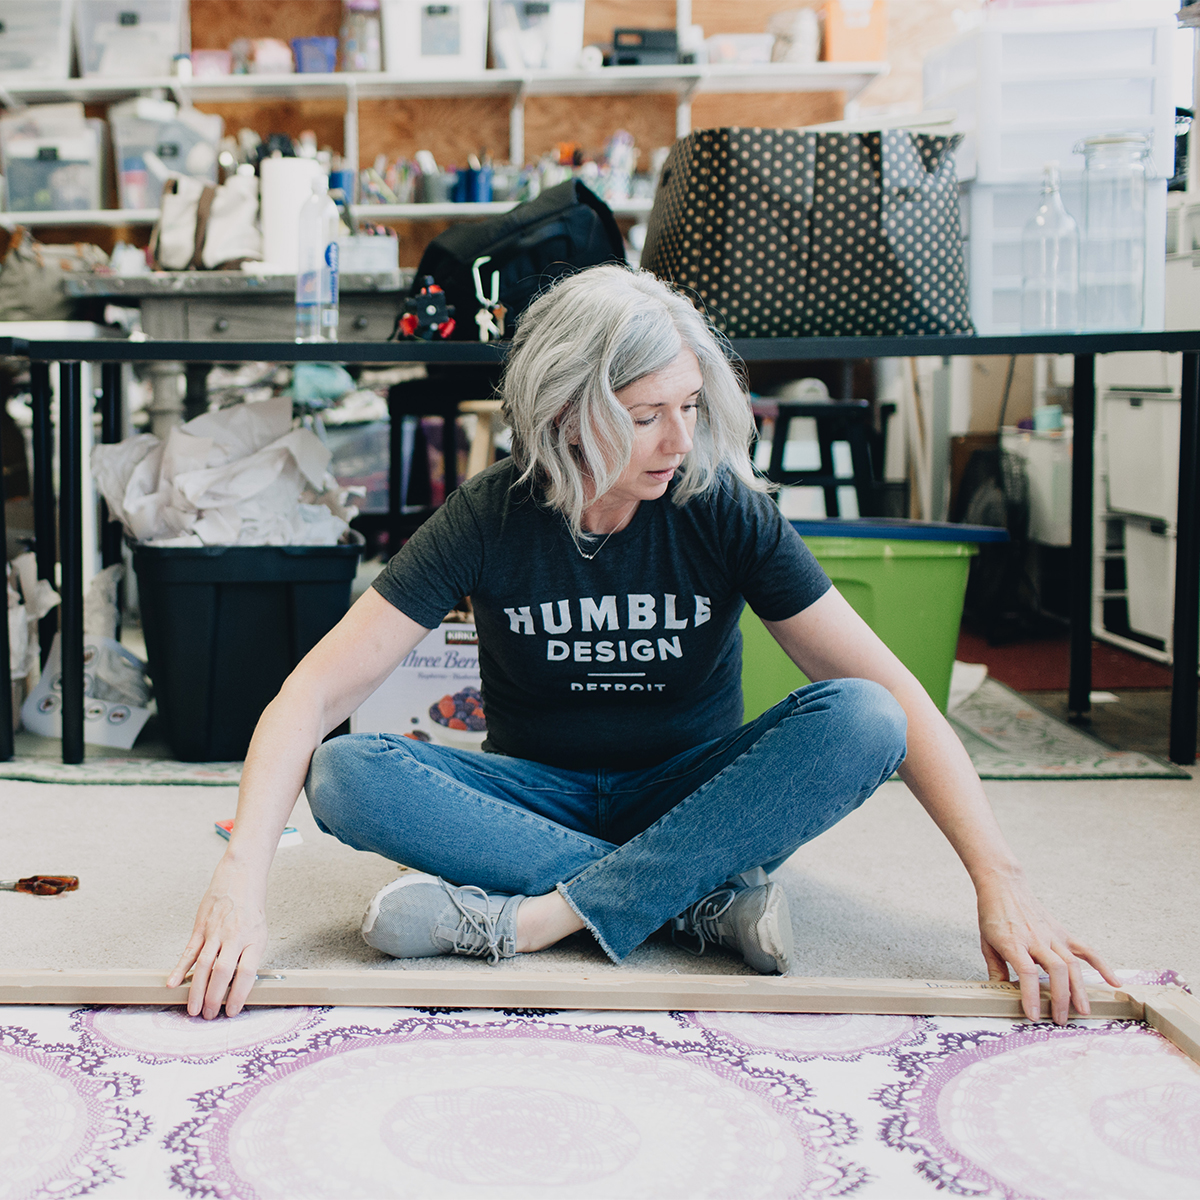 Humble design volunteer crafting decor for space